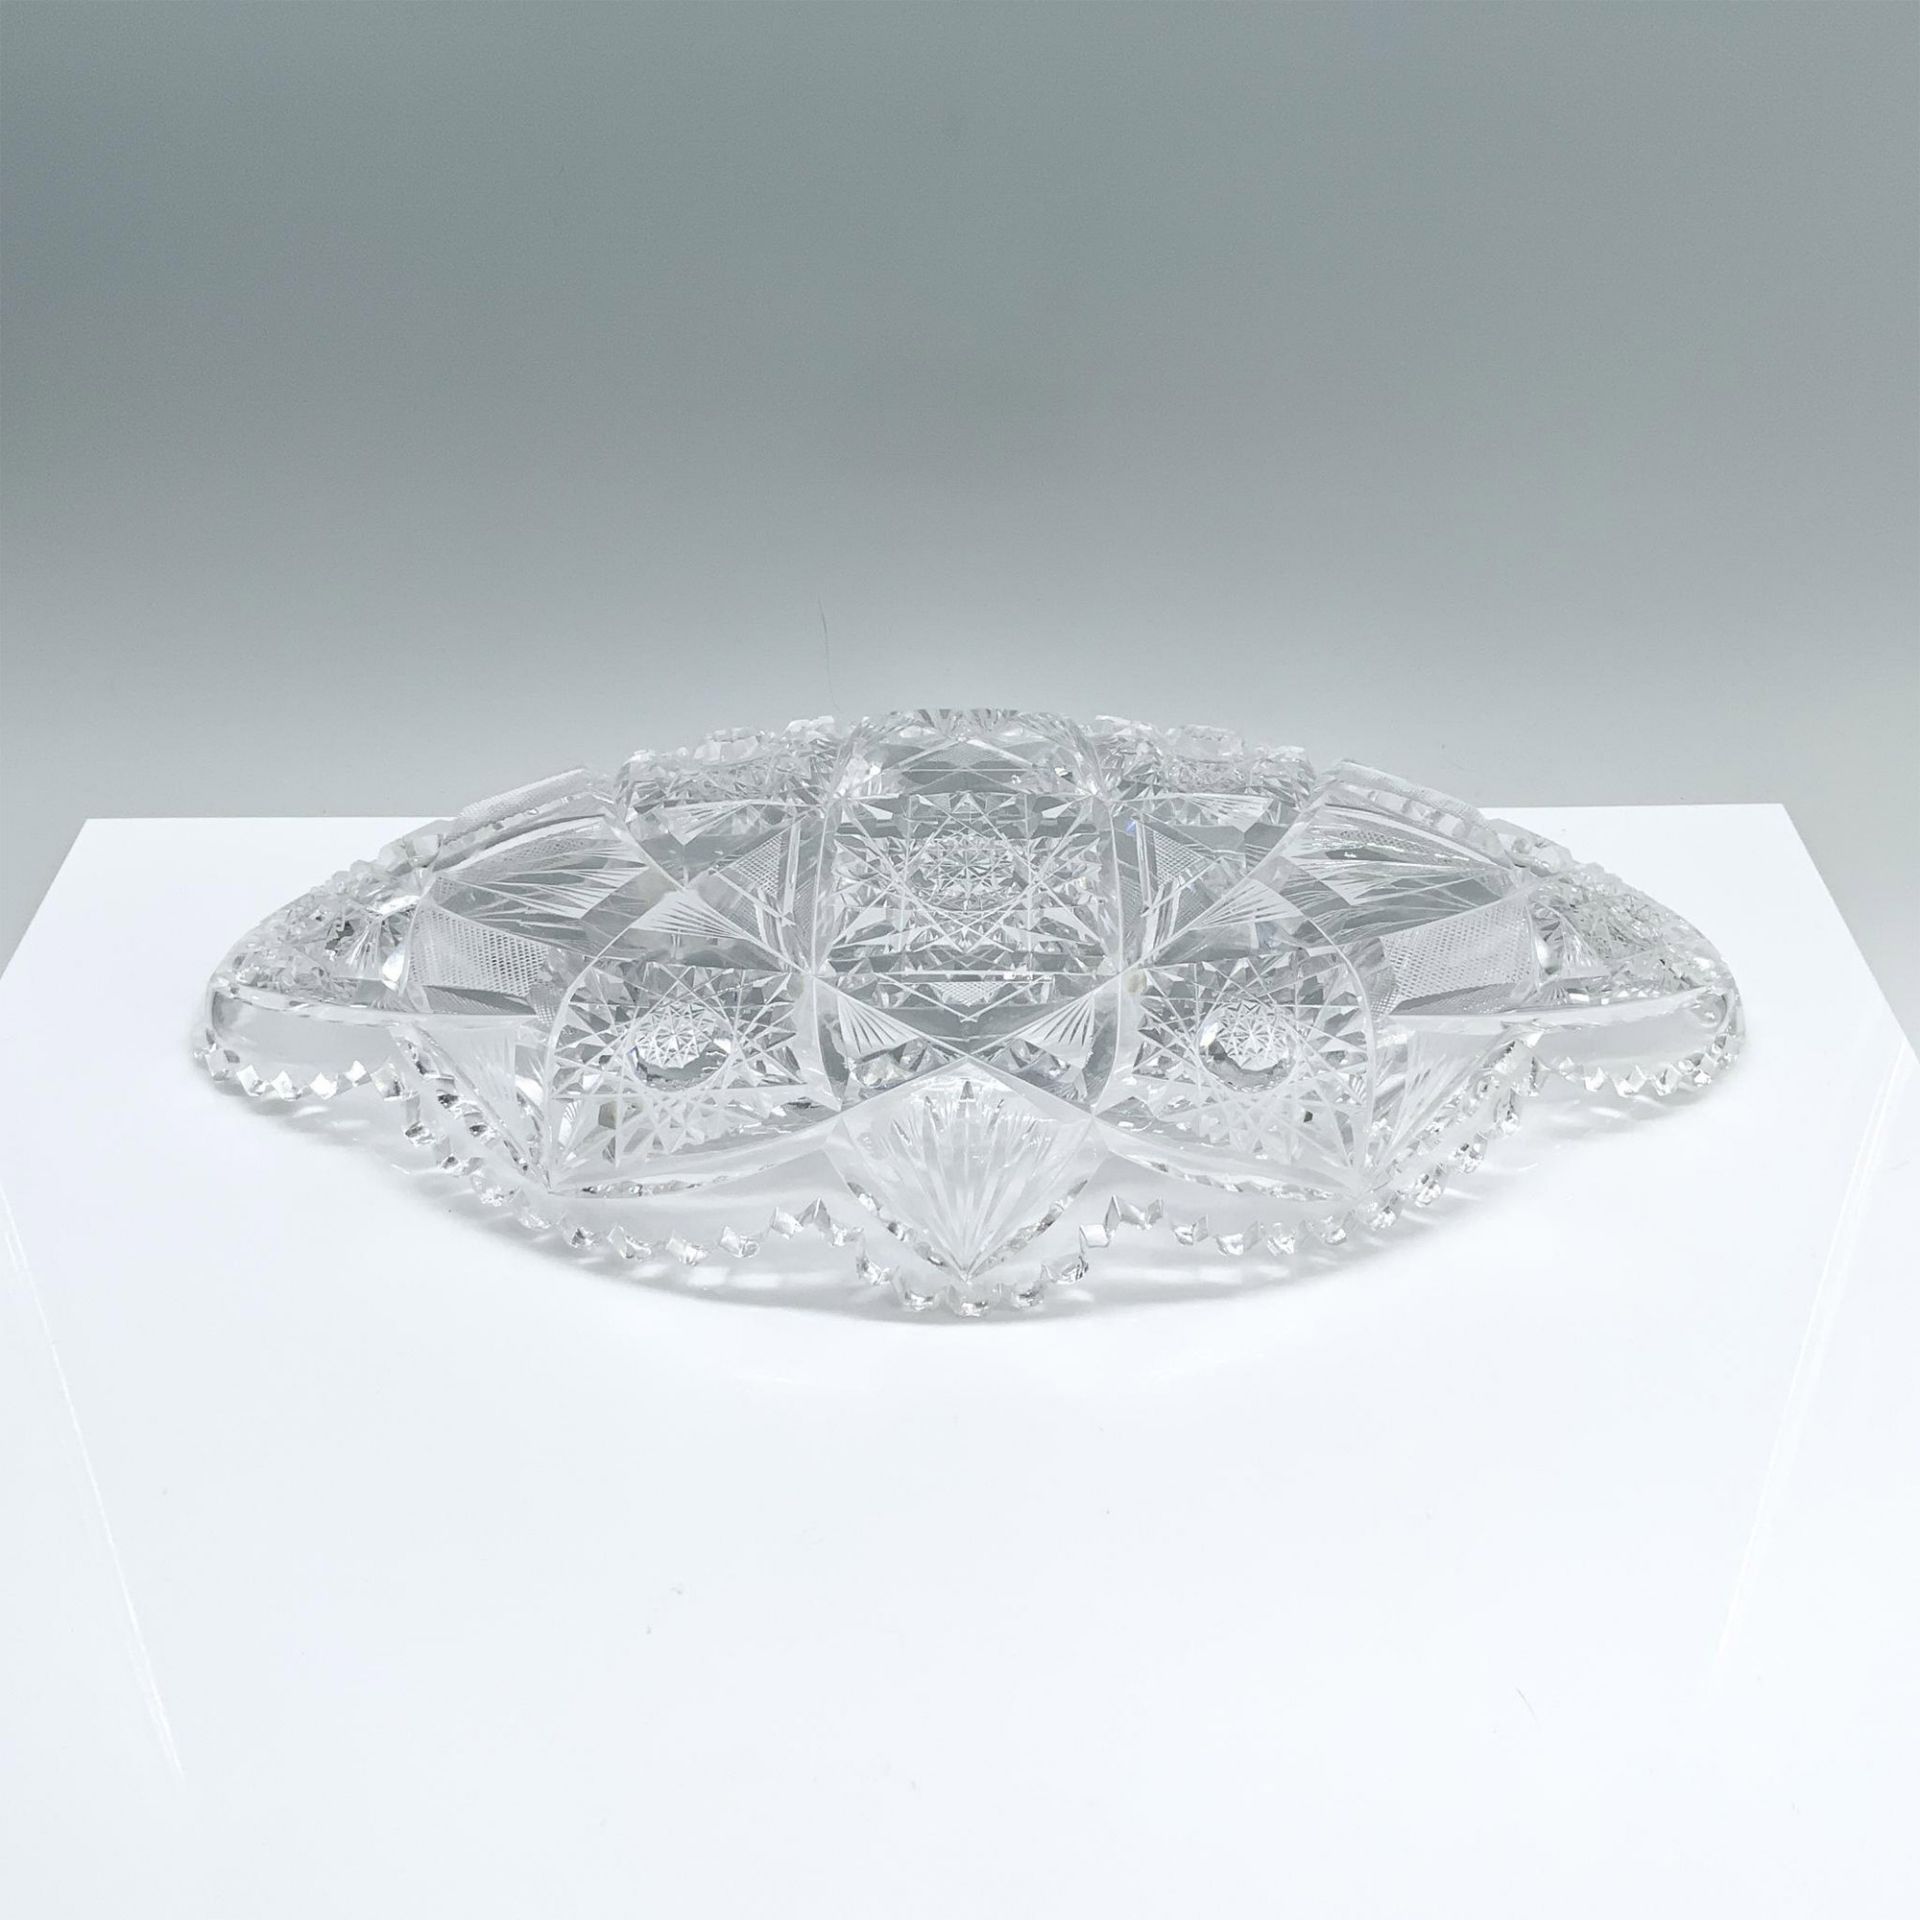 American Brilliant Cut Glass Serving Bowl - Image 3 of 3